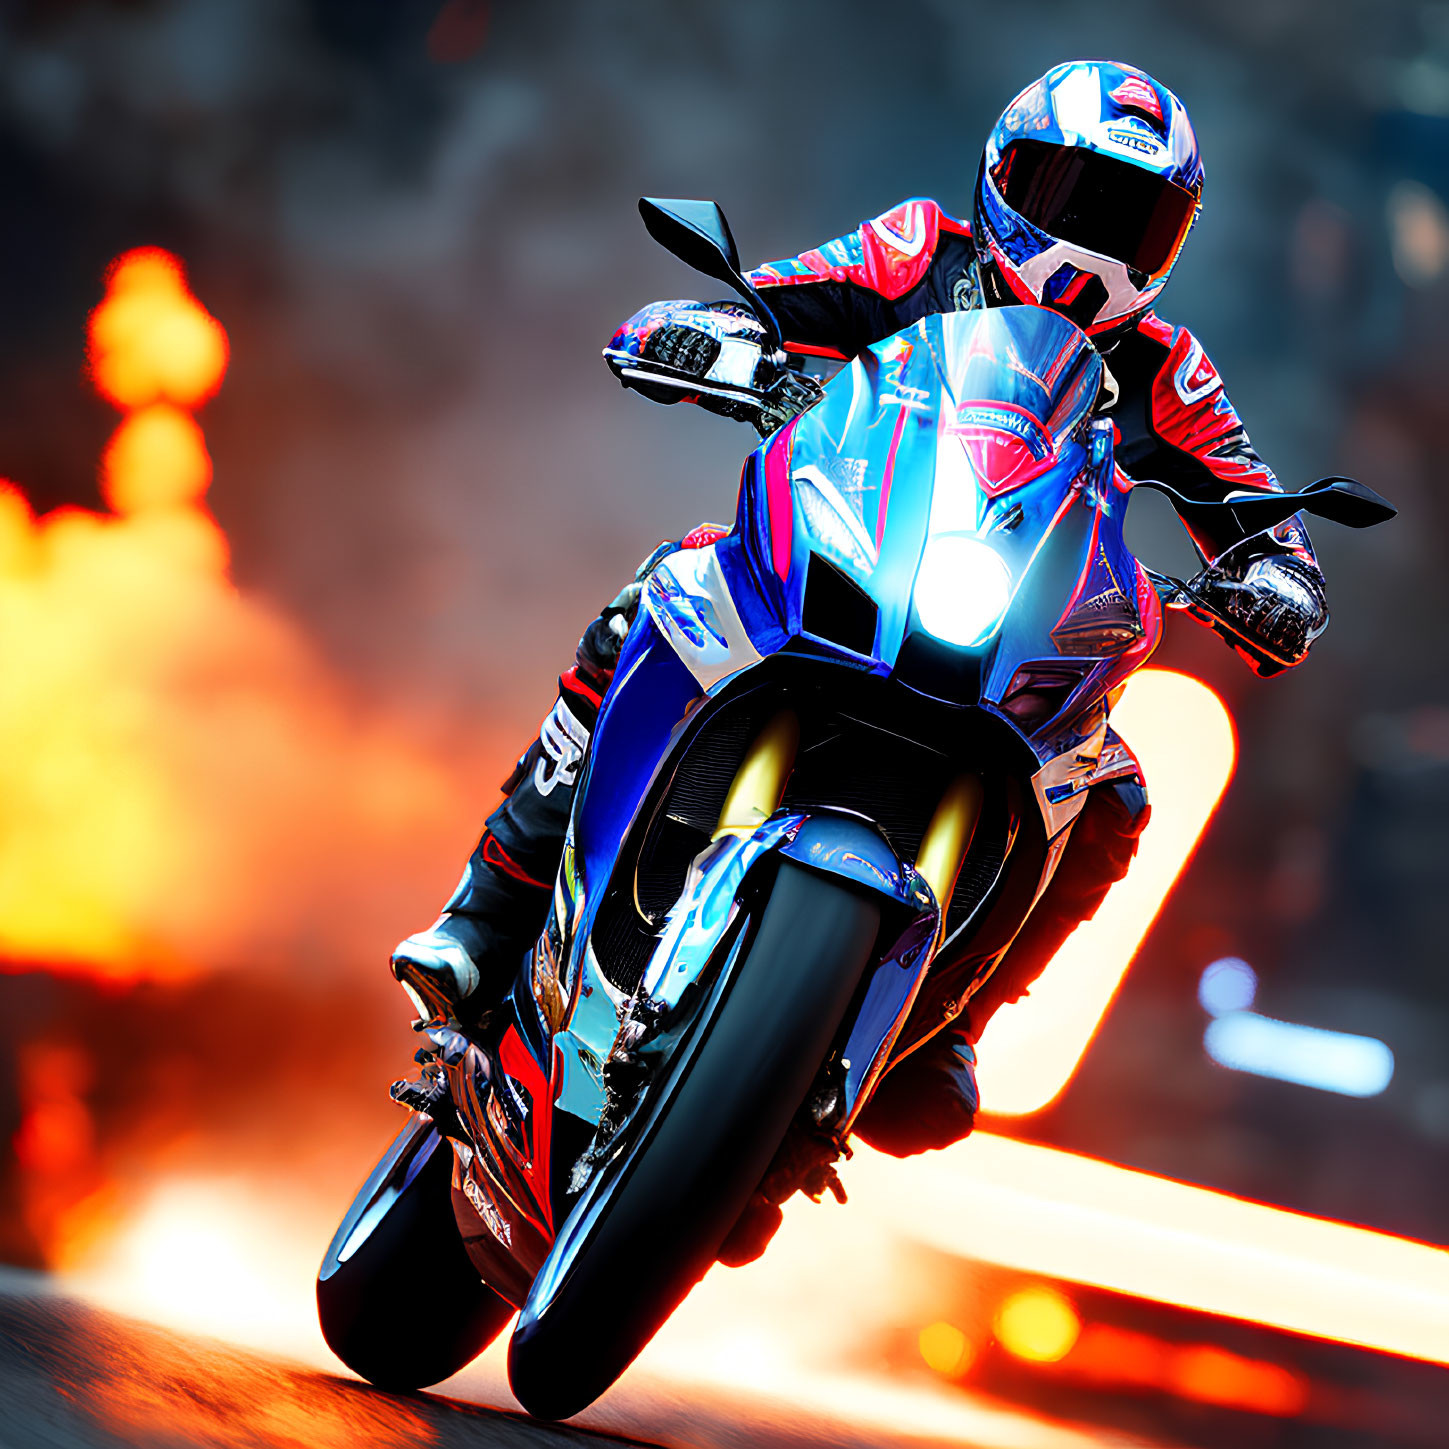 Sportbike racer in vibrant blue and red gear navigating fiery turn